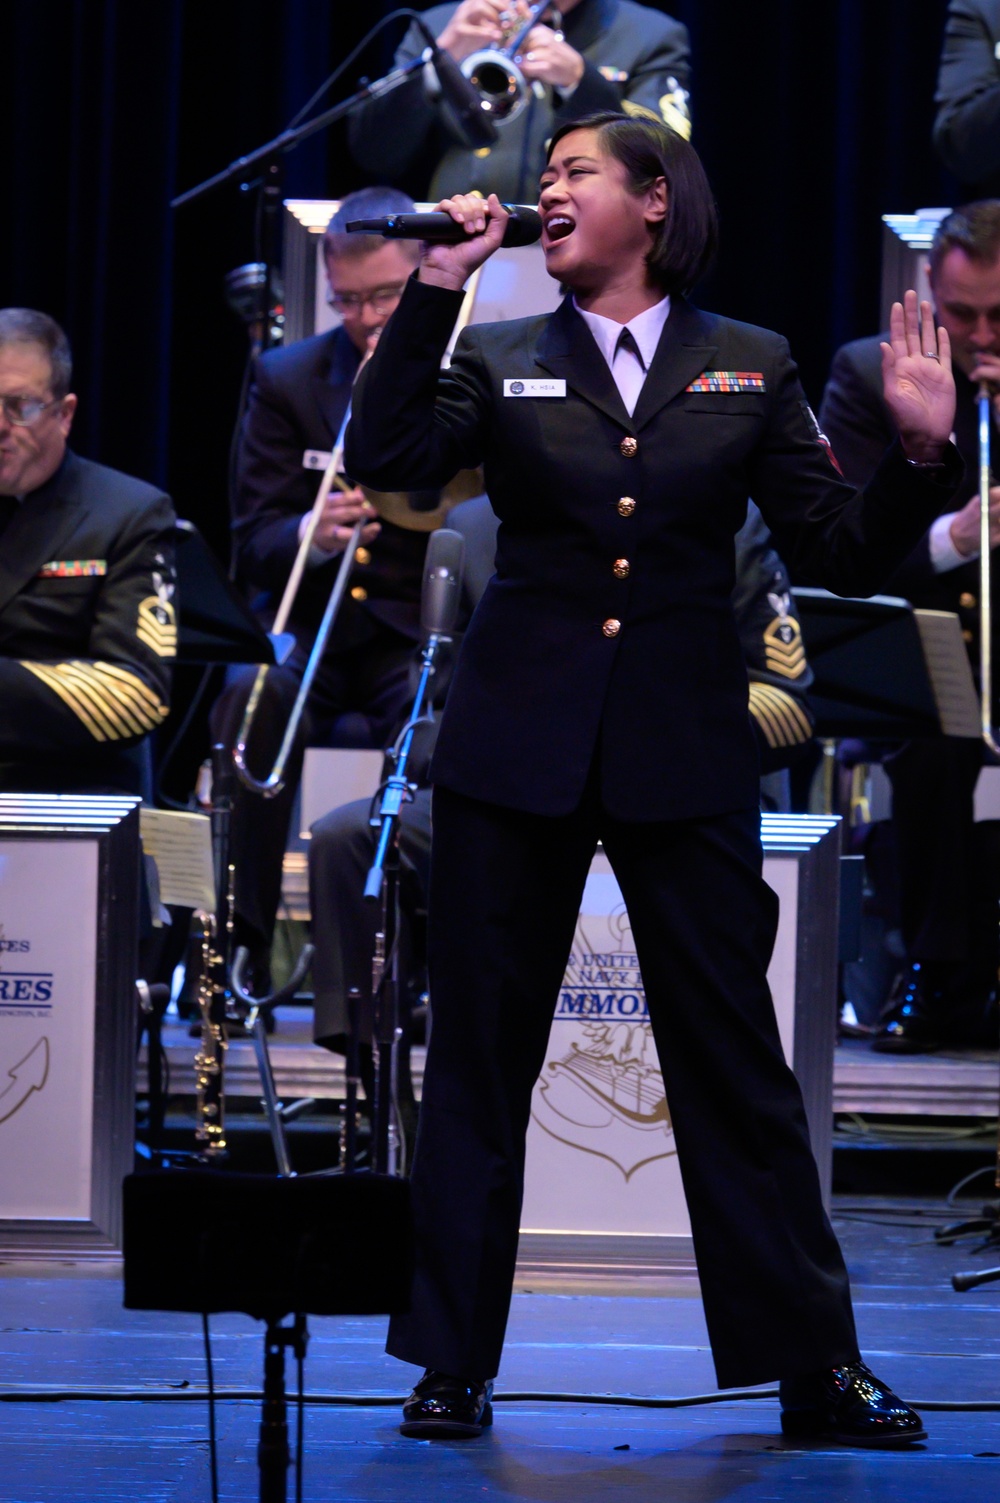 U.S. Navy Band Commodores Visit New Haven, CT